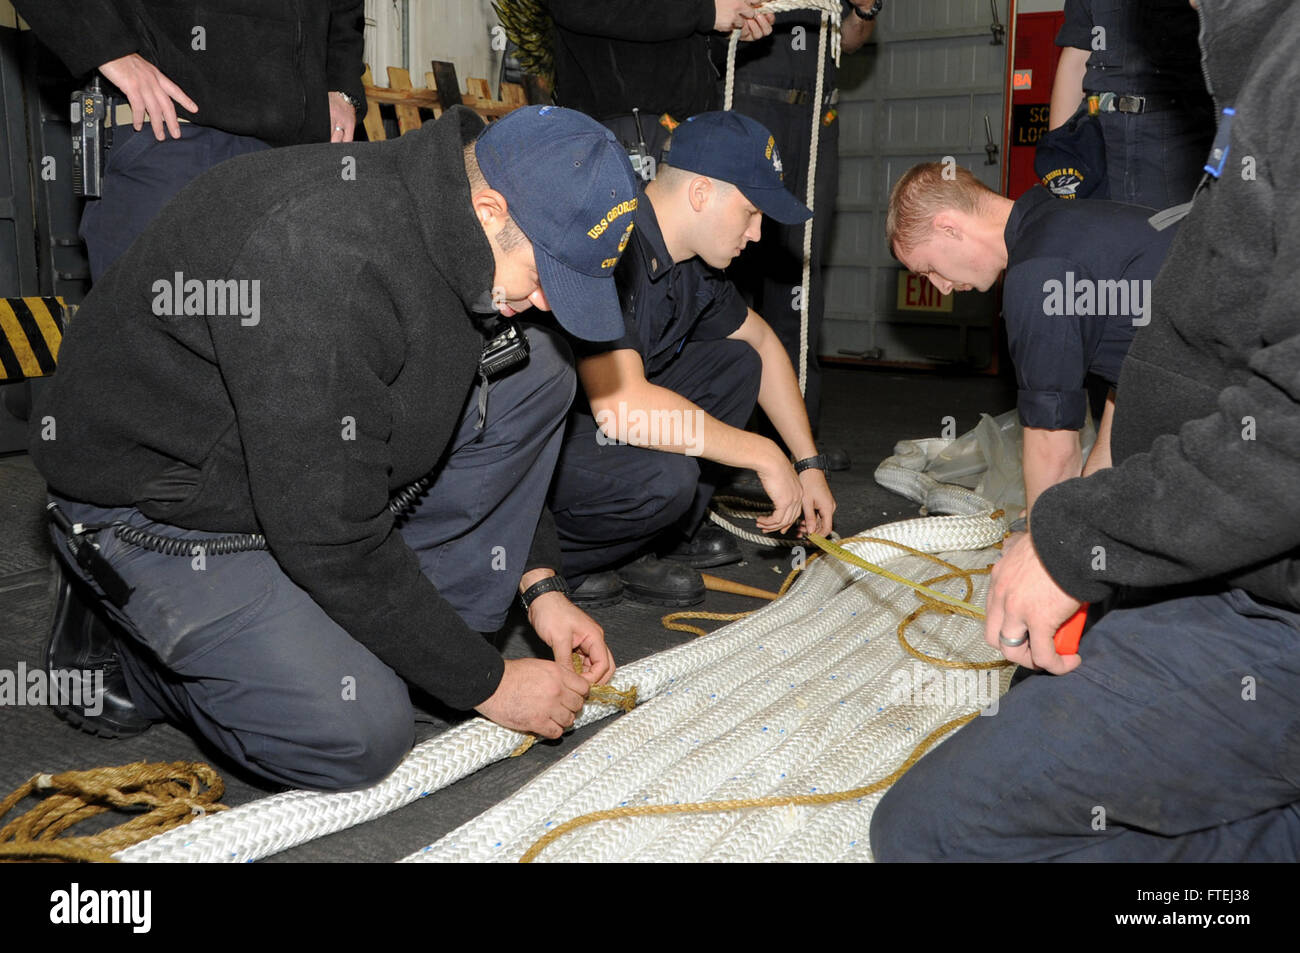 MEDITERRANEAN SEA (Nov. 1, 2014) Sailors splice a mooring line aboard the aircraft carrier USS George H.W. Bush (CVN 77). George H.W. Bush, homeported in Norfolk, Va., is conducting naval operations in the U.S. 6th Fleet area of operations in support of U.S. national security interests in Europe. Stock Photo